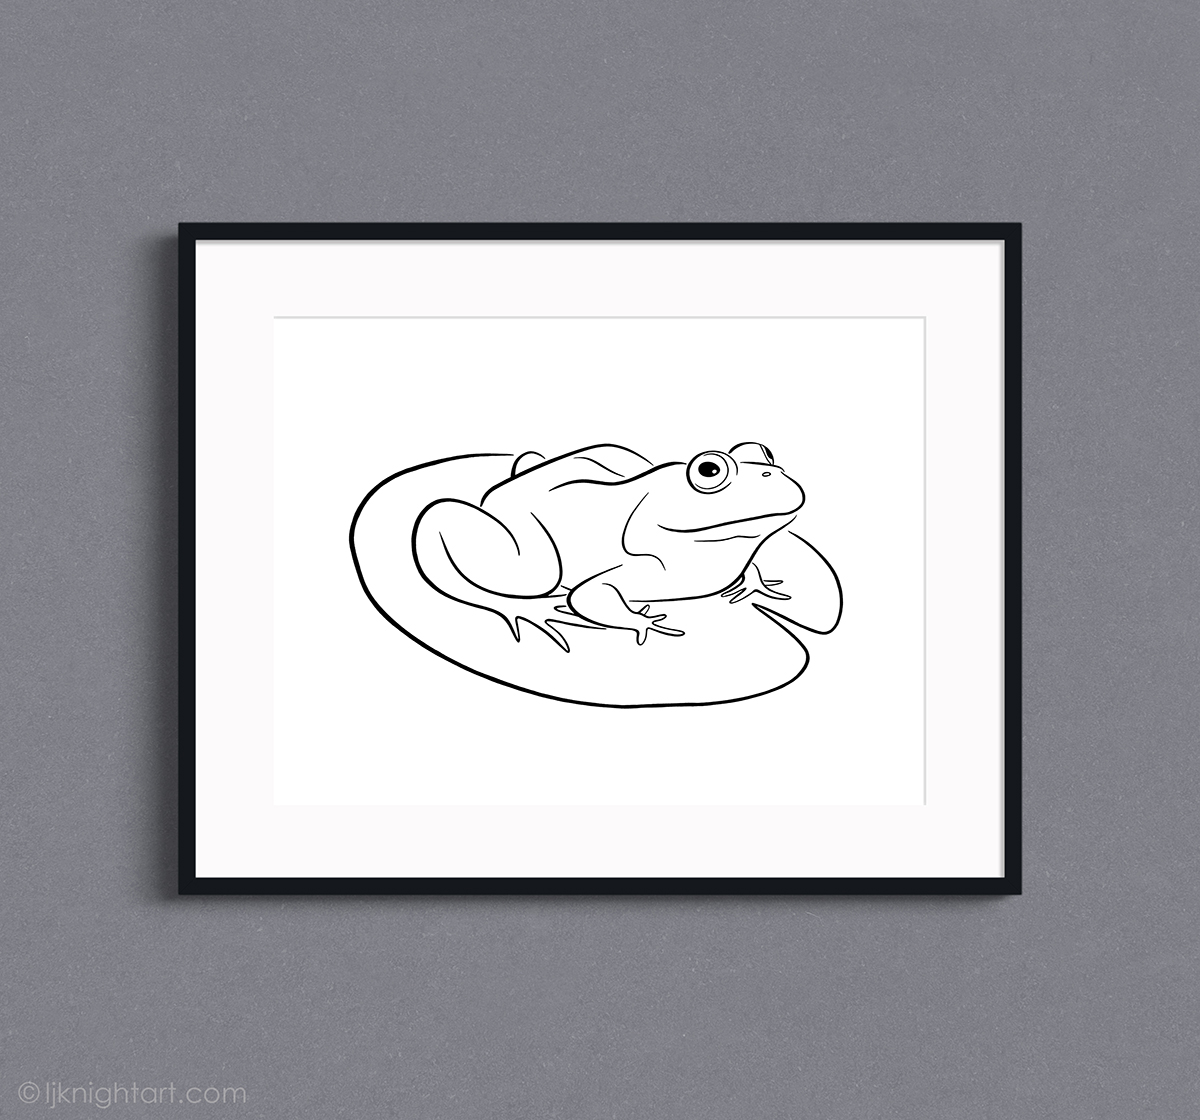 Black and white line drawing of a frog sitting on a lily pad - contemporary animal art by L.J. Knight